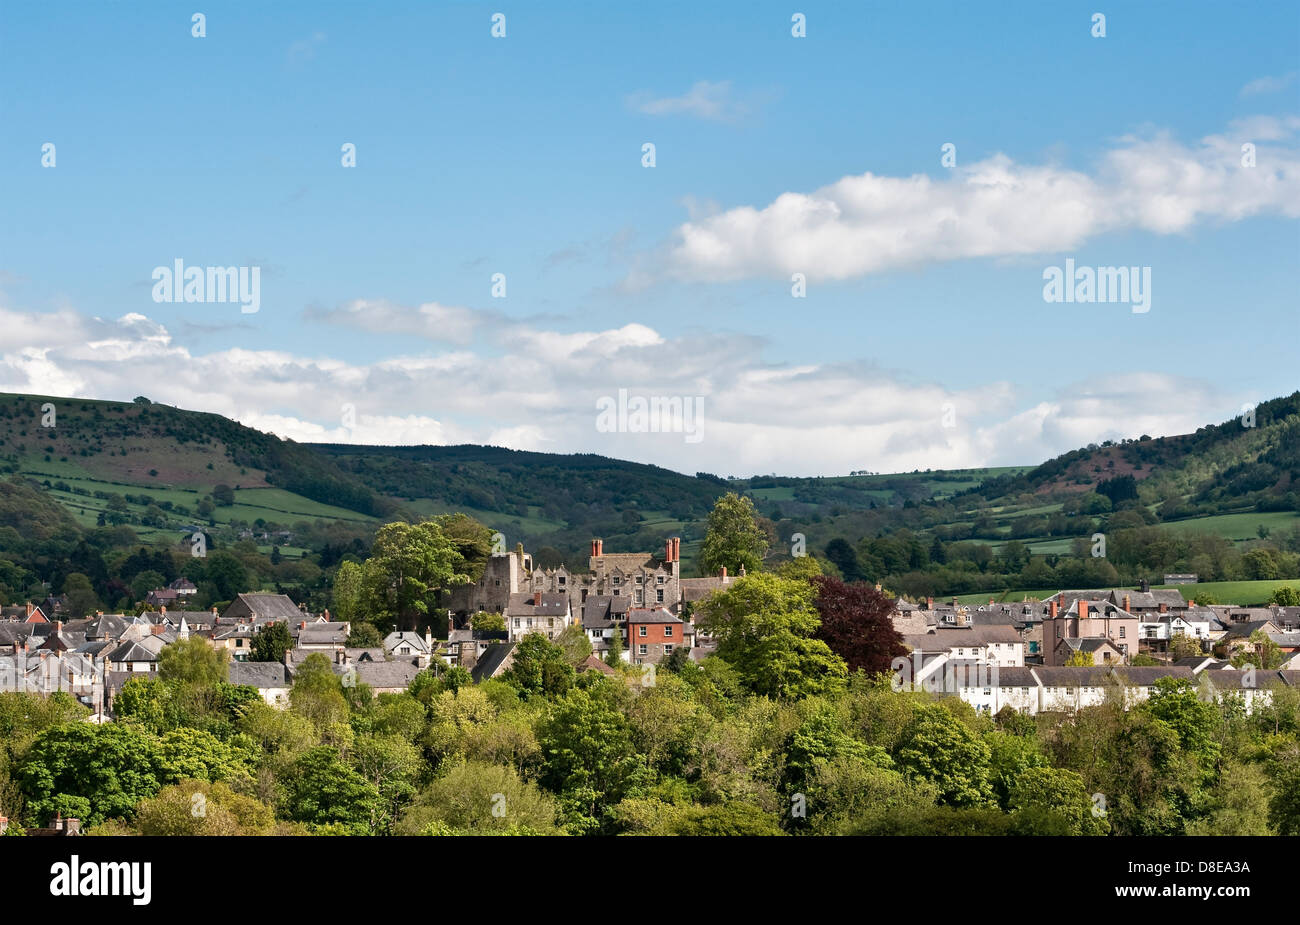 The 'book' town of Hay-on-Wye (on the Herefordshire - Wales border) is dominated both by its Jacobean castle and the wild Black Mountains beyond (UK) Stock Photo